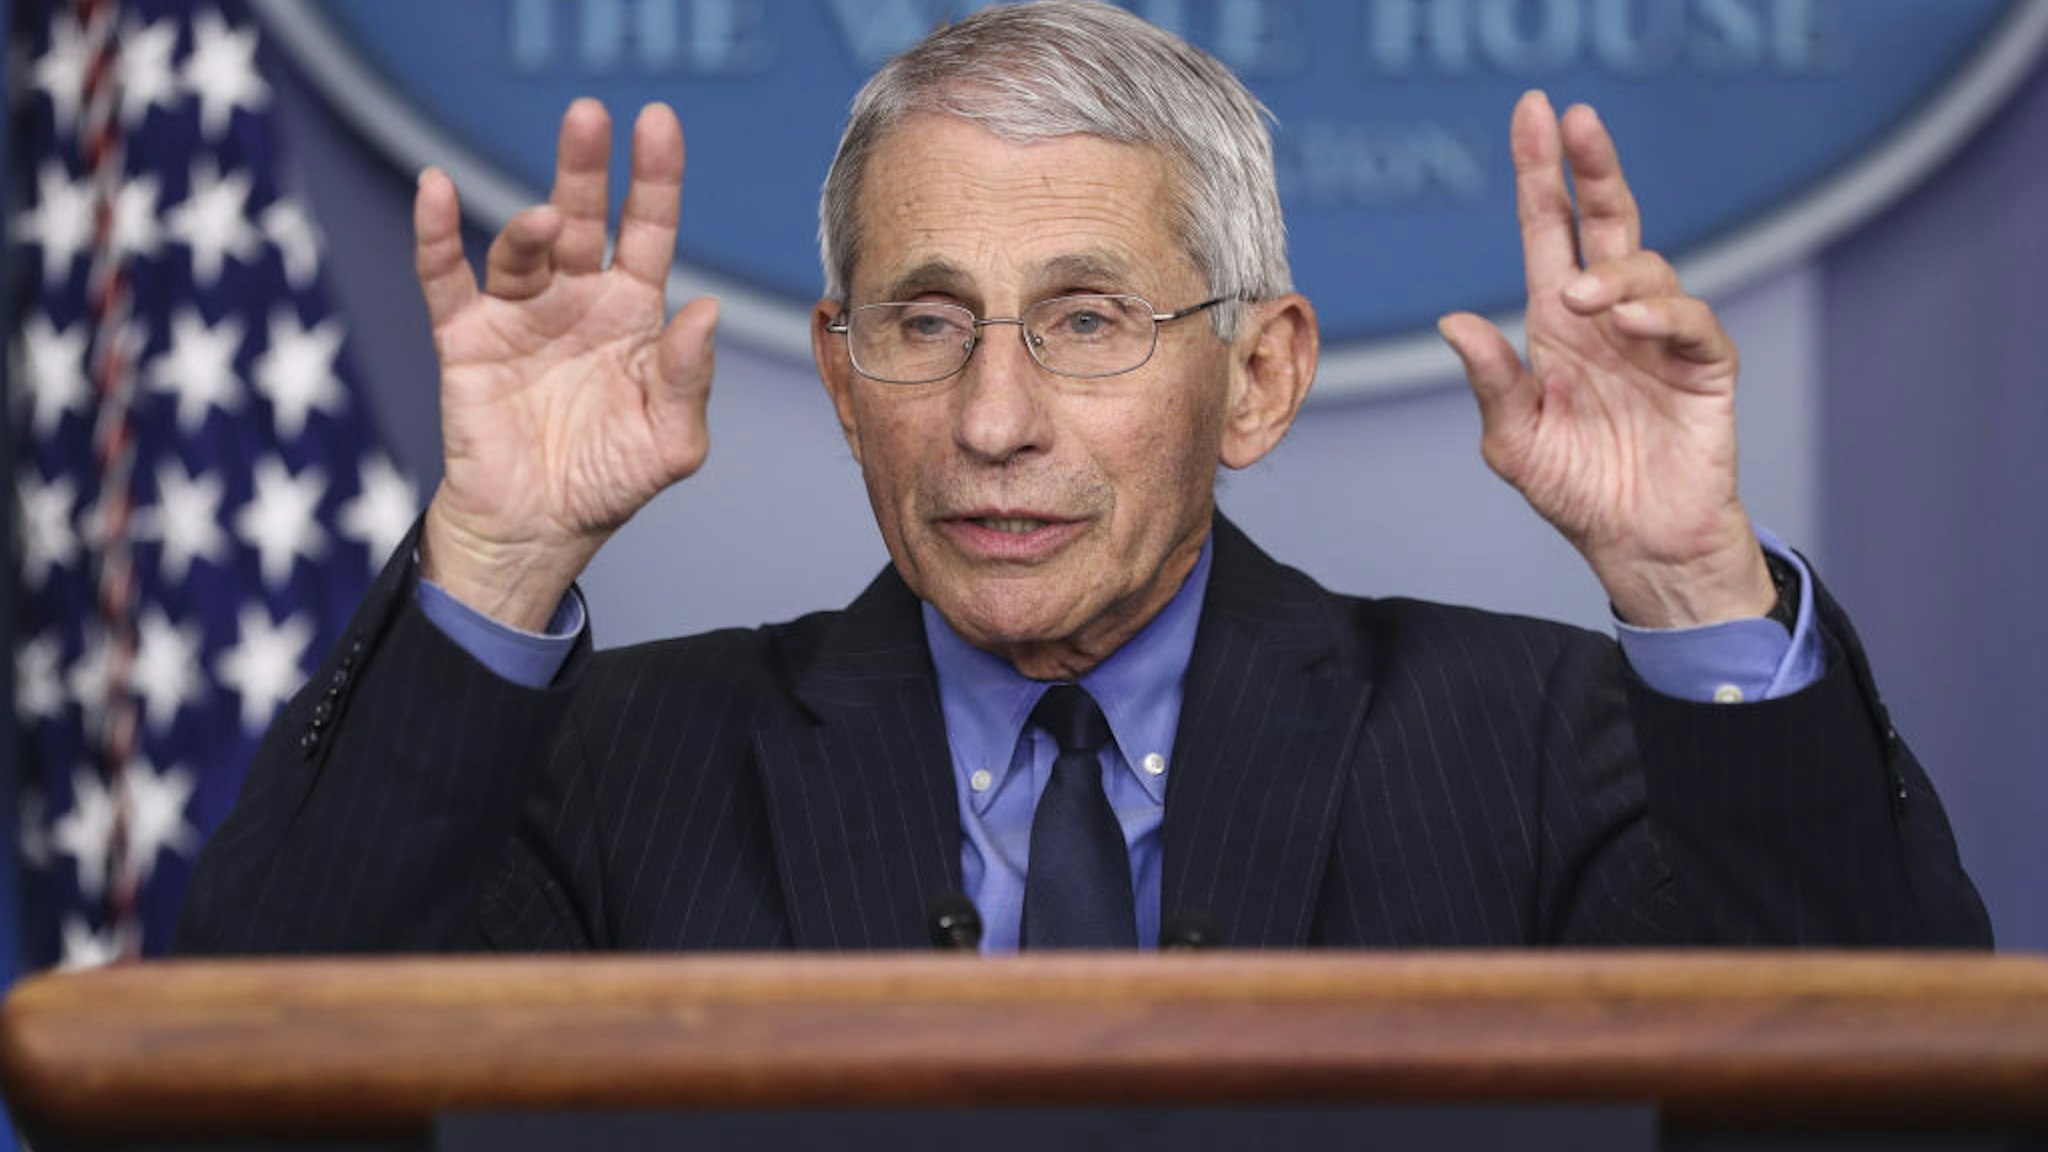 Anthony Fauci, director of the National Institute of Allergy and Infectious Diseases, speaks during a news conference at the White House in Washington D.C., U.S. on Friday, April 17, 2020. President Donald Trump said there’s enough coronavirus testing capacity to put in place his plan to allow a phased reopening of the economy, even though some state officials and business leaders have raised alarms about shortages. Photographer: Oliver Contreras/Sipa/Bloomberg